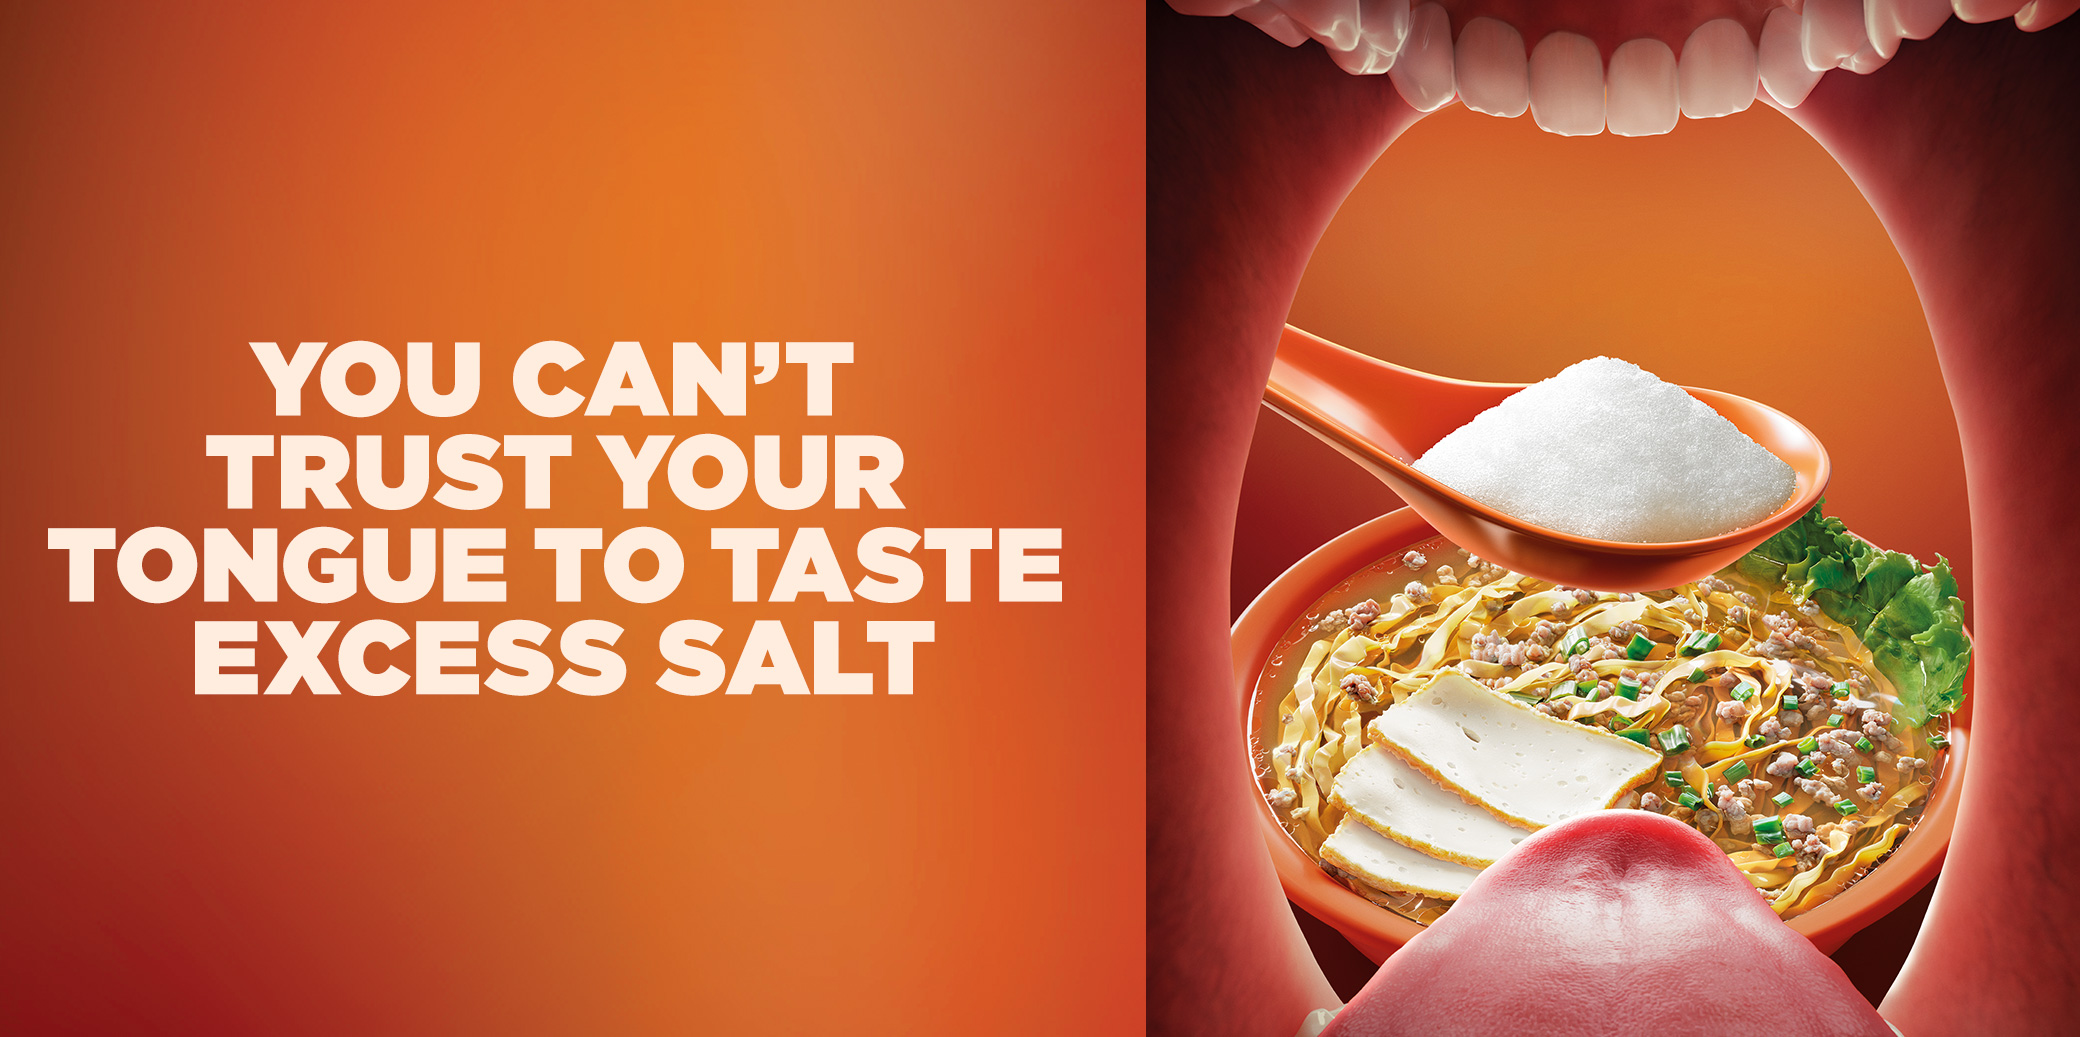 You can't trust your tongue to taste excess salt